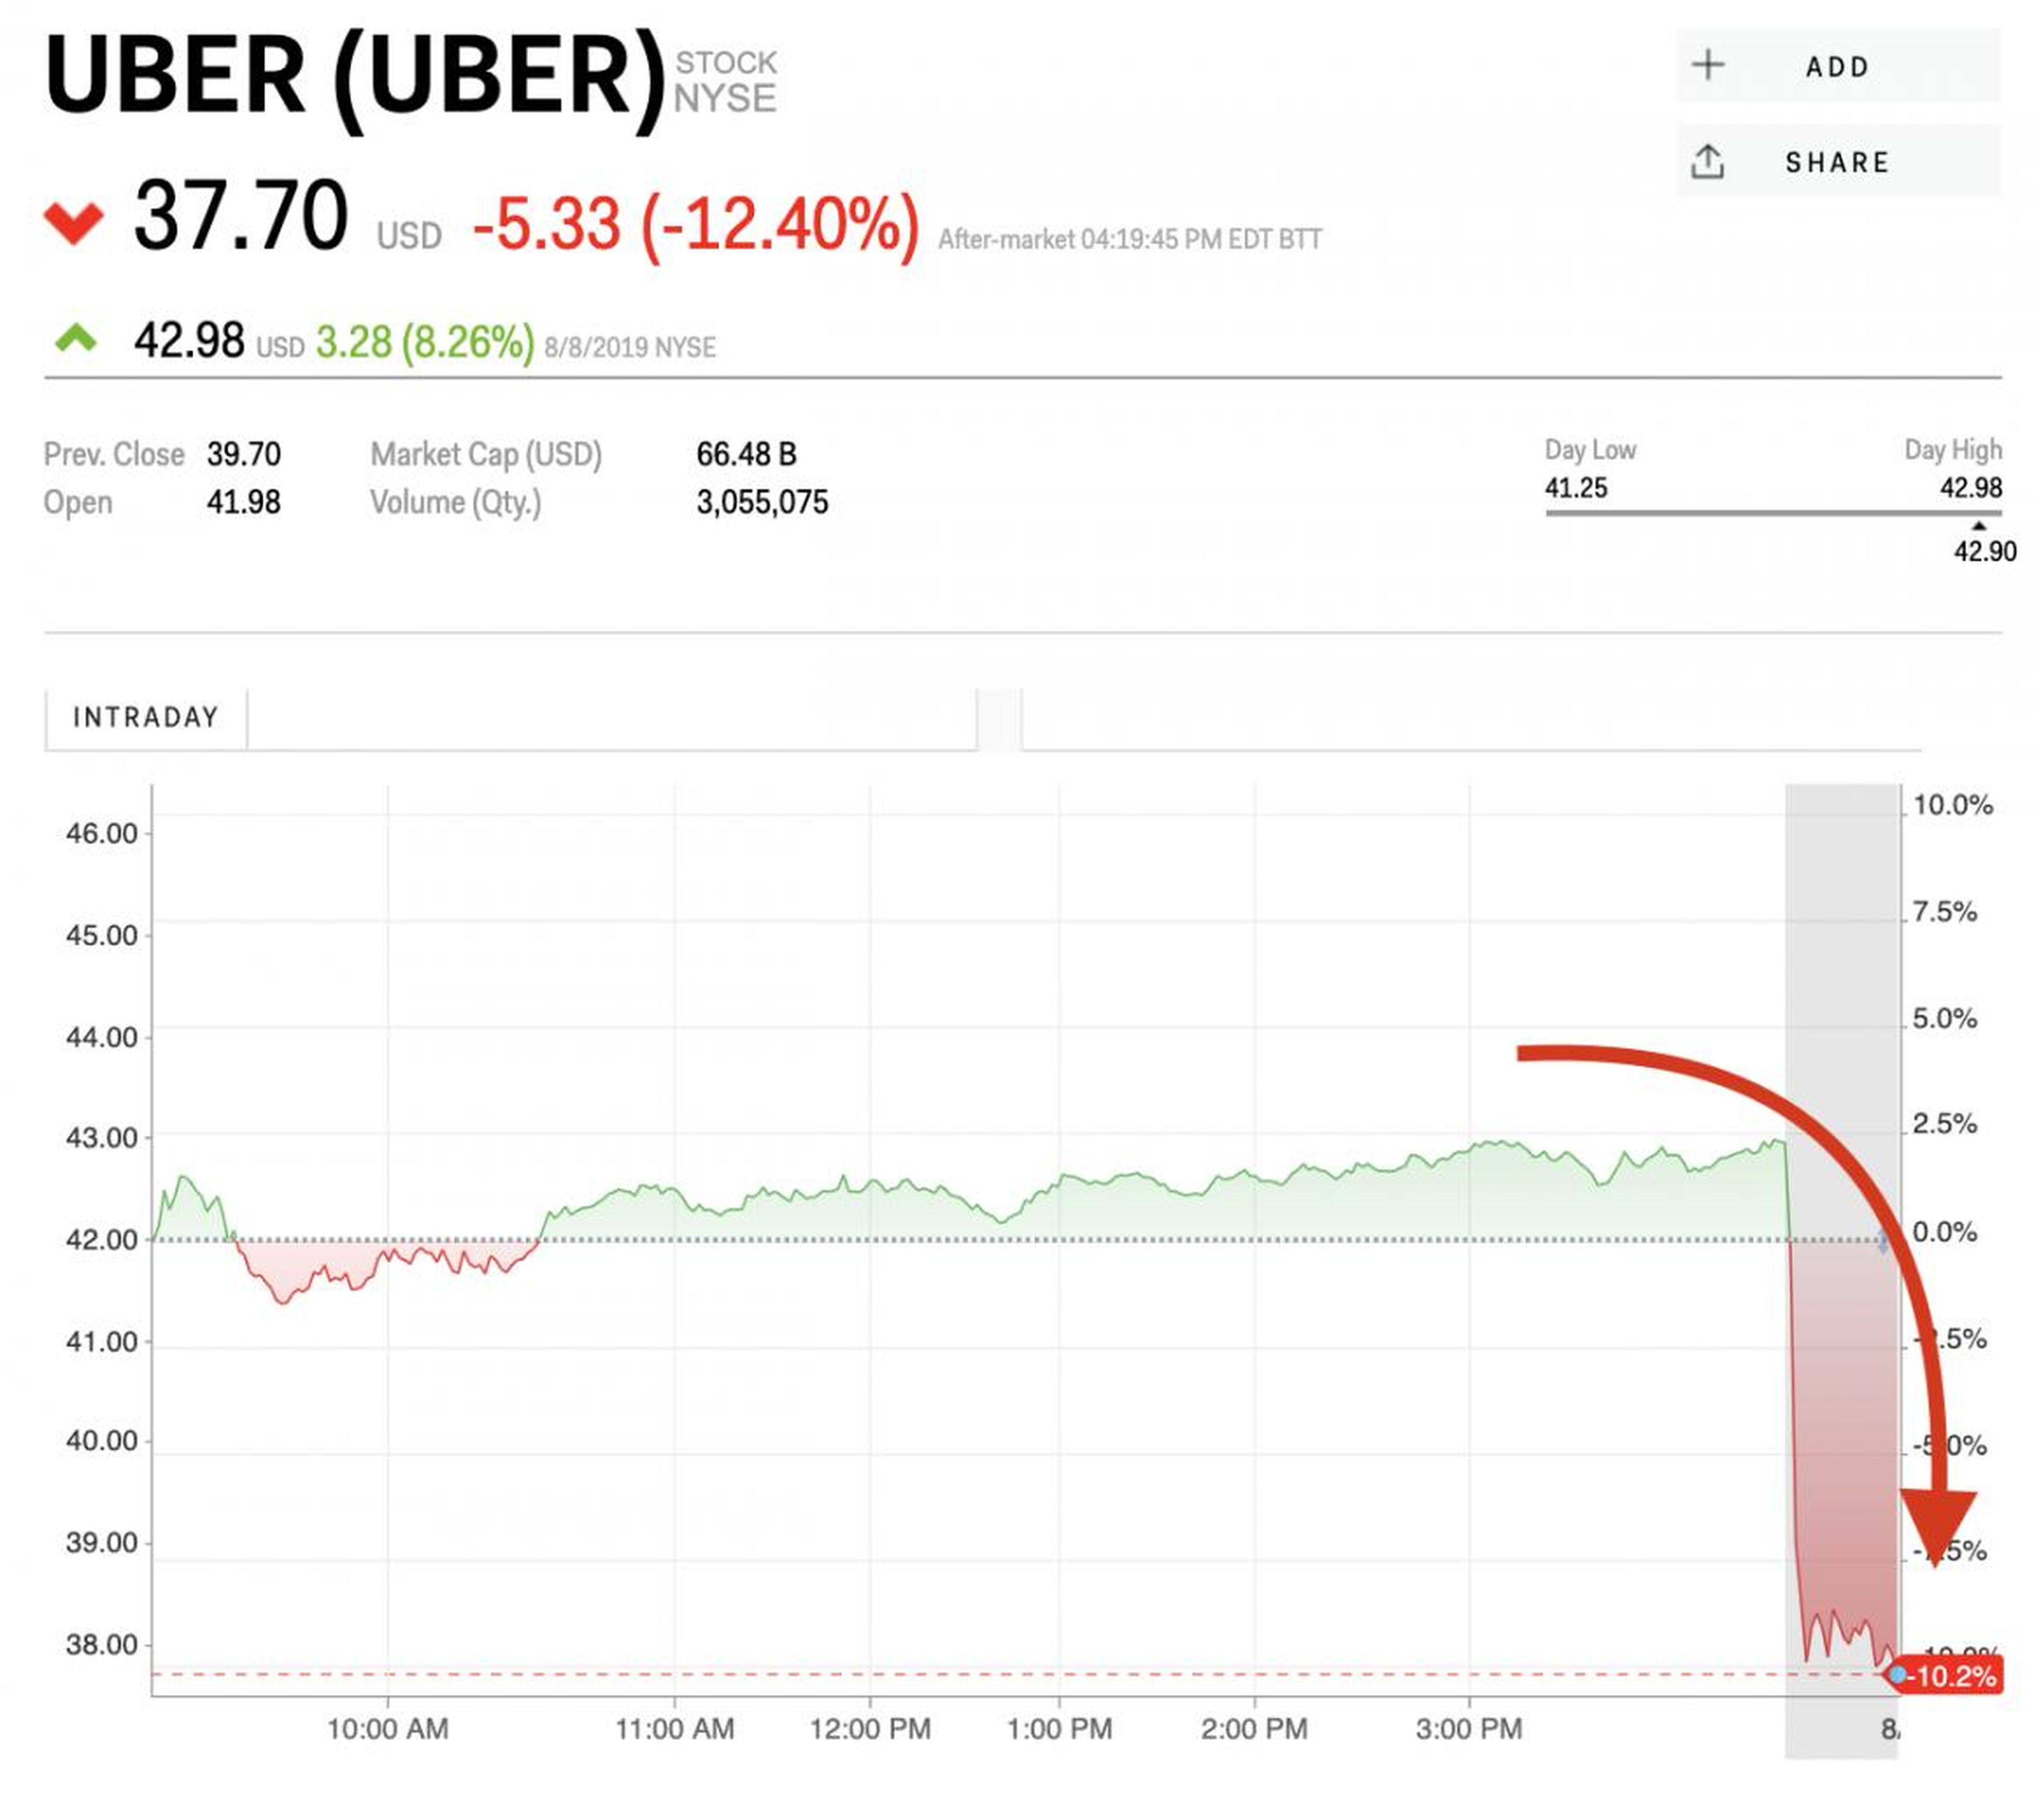 Uber just reported massive losses that were larger than Wall Street expected — and the stock is sinking